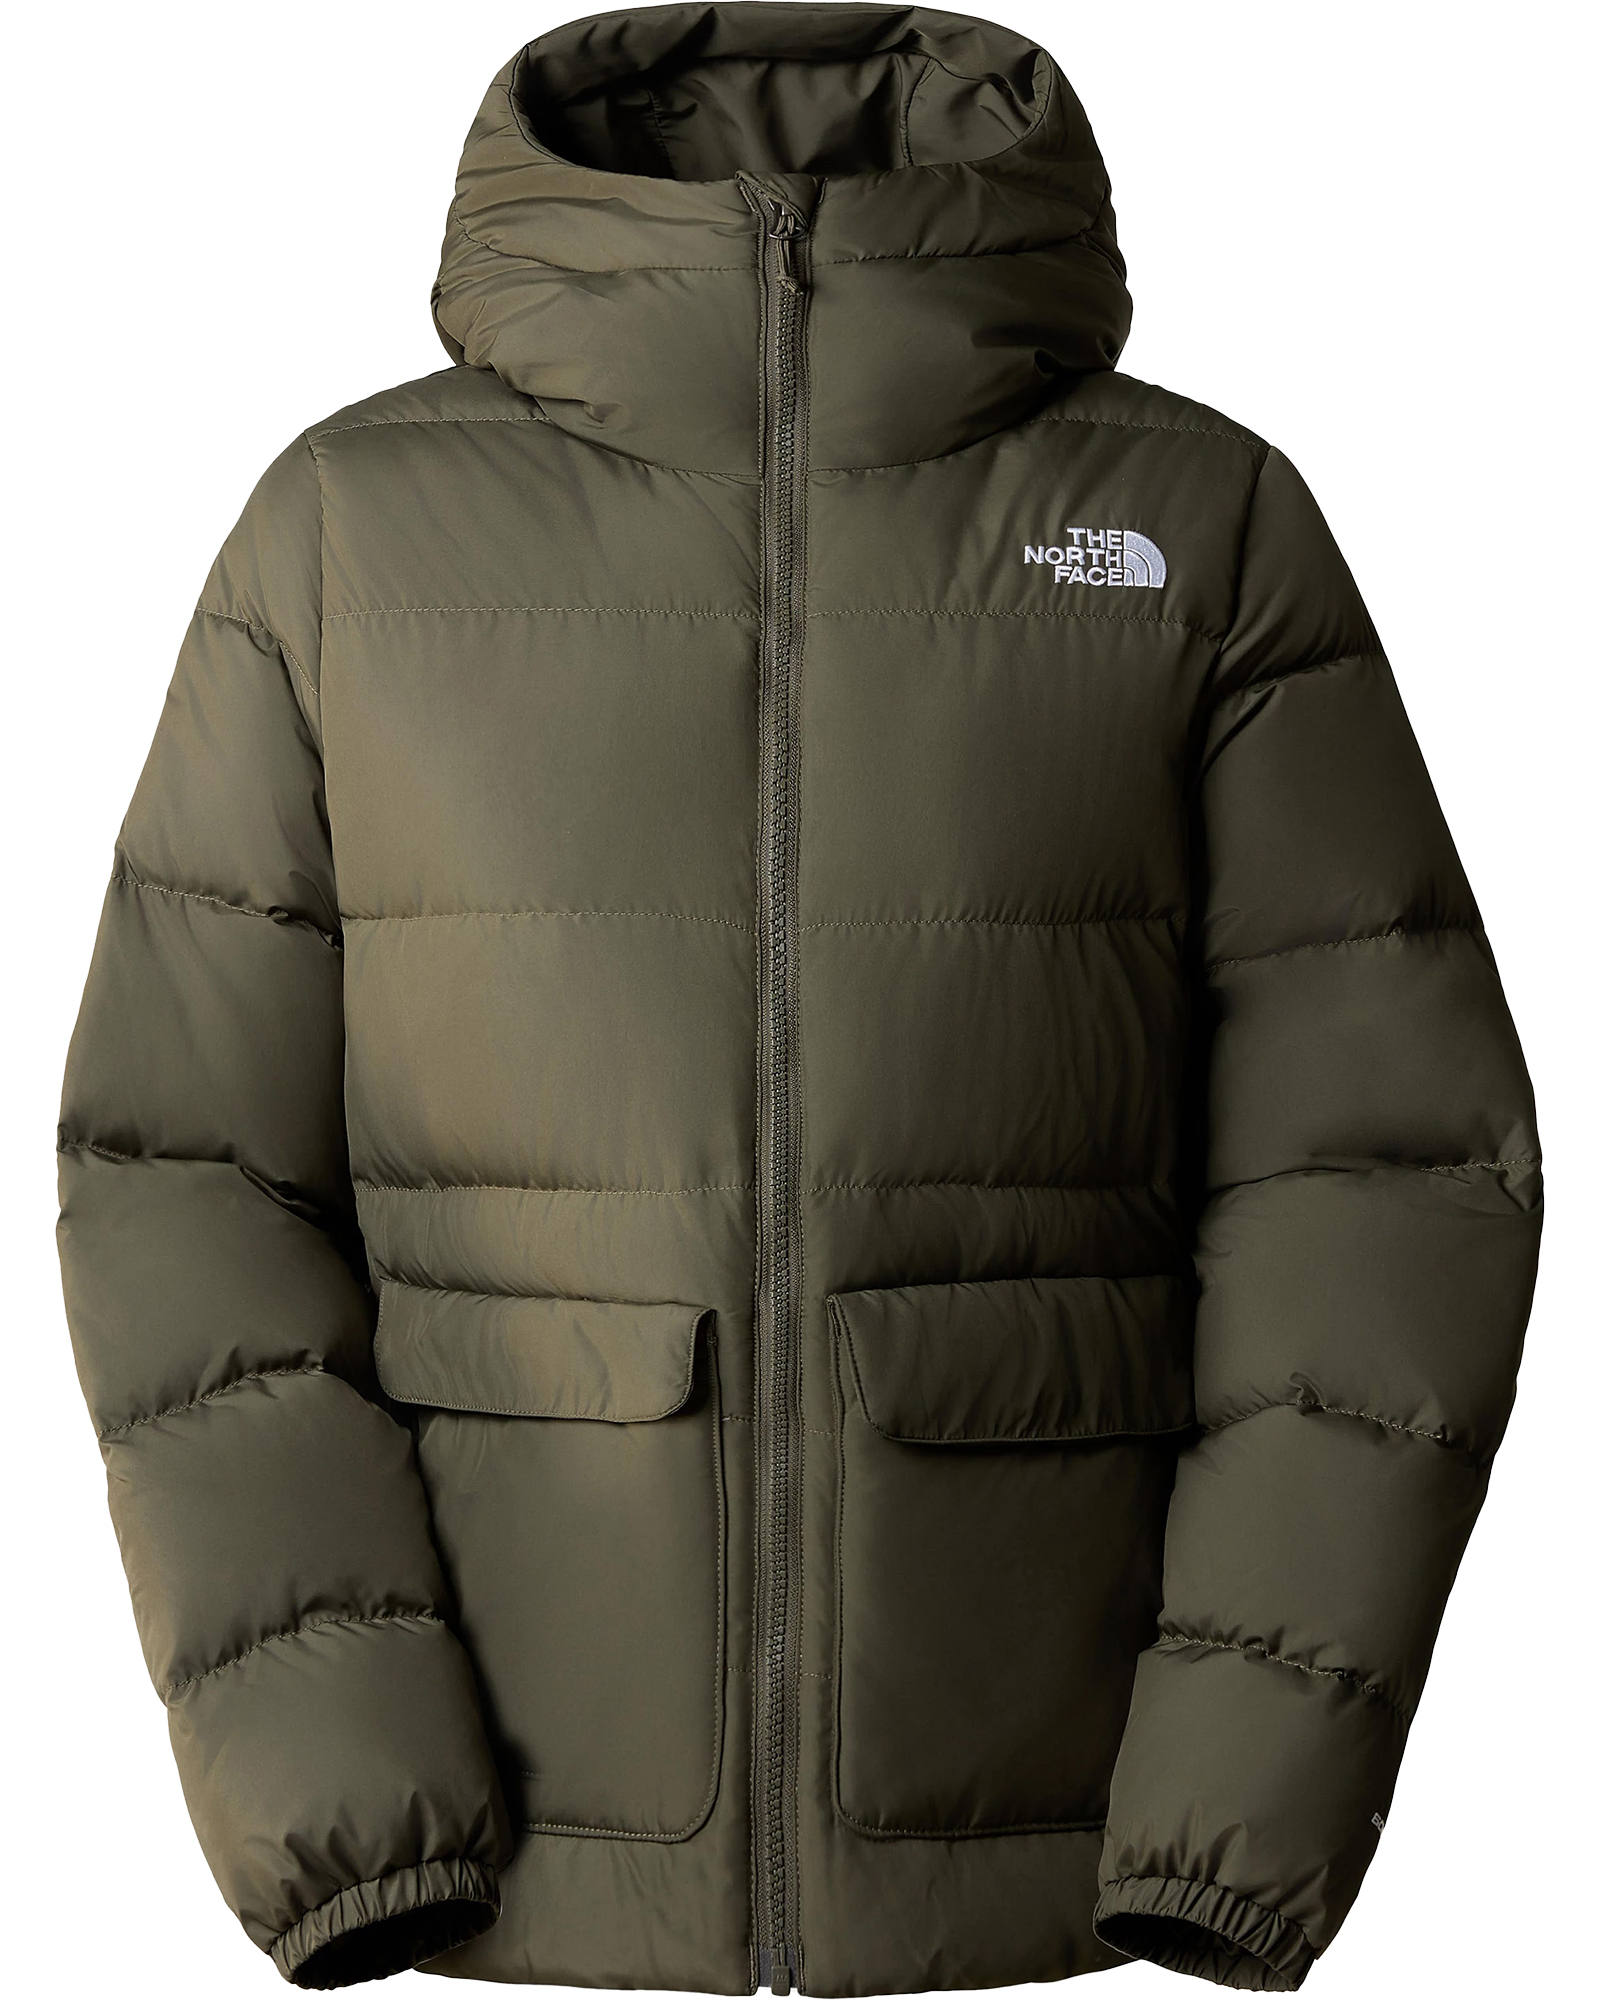 The North Face Women’s Gotham Down Jacket - New Taupe Green XS